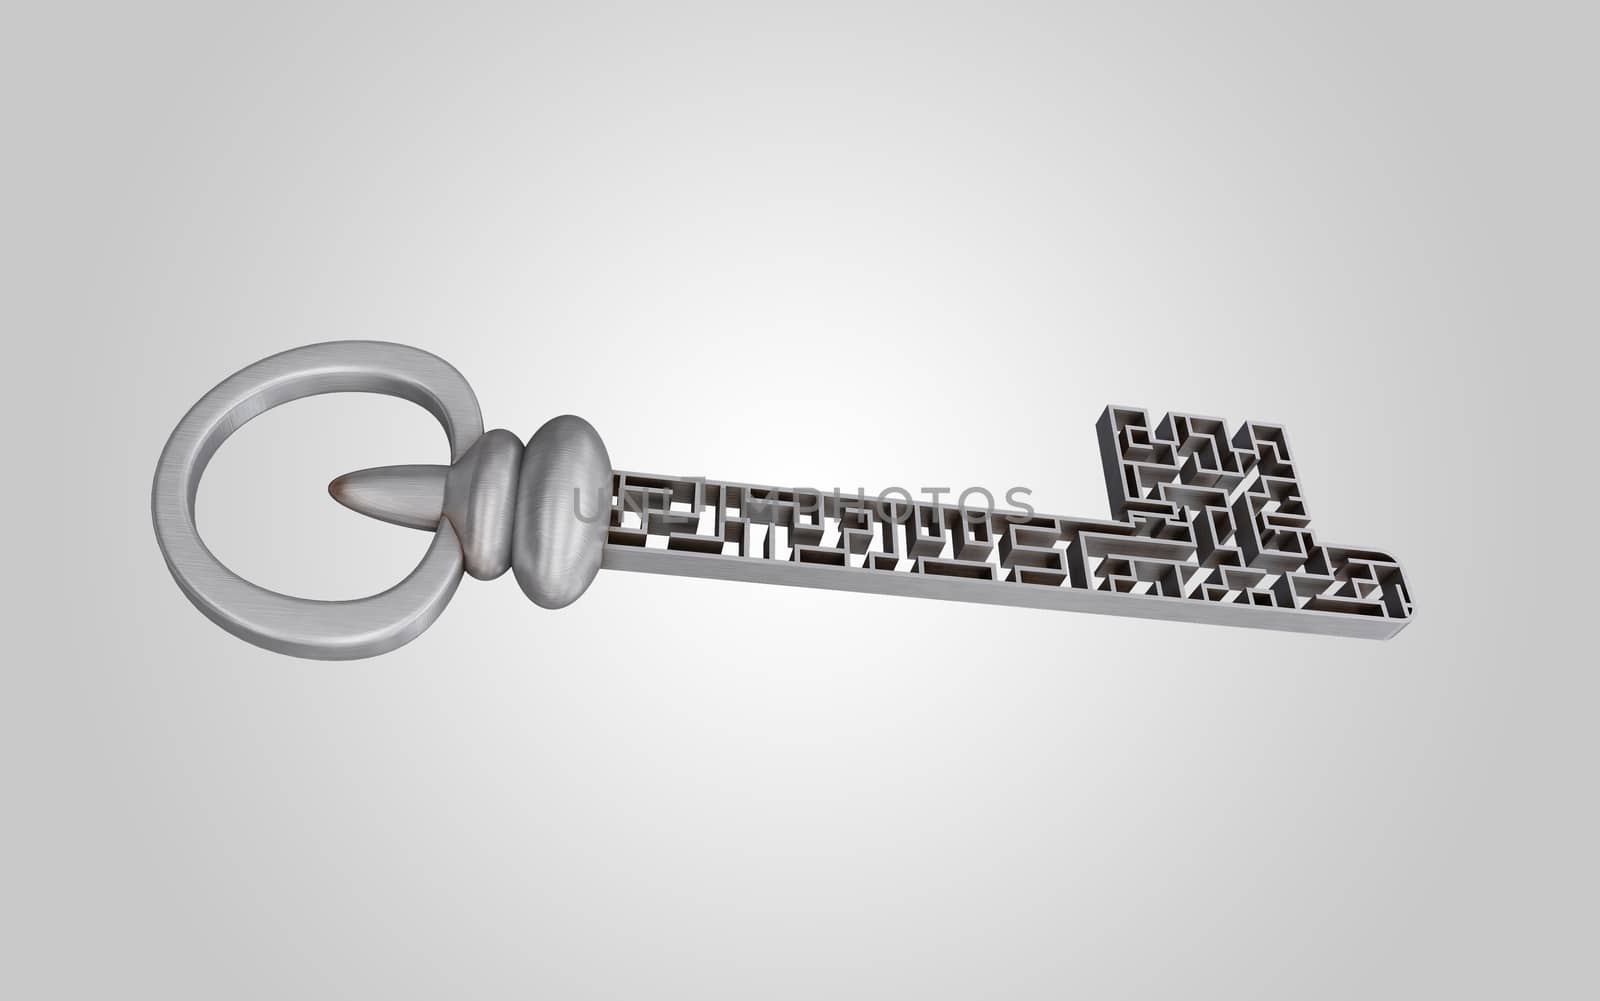 The key is a maze, on a gray gradient background. by teerawit